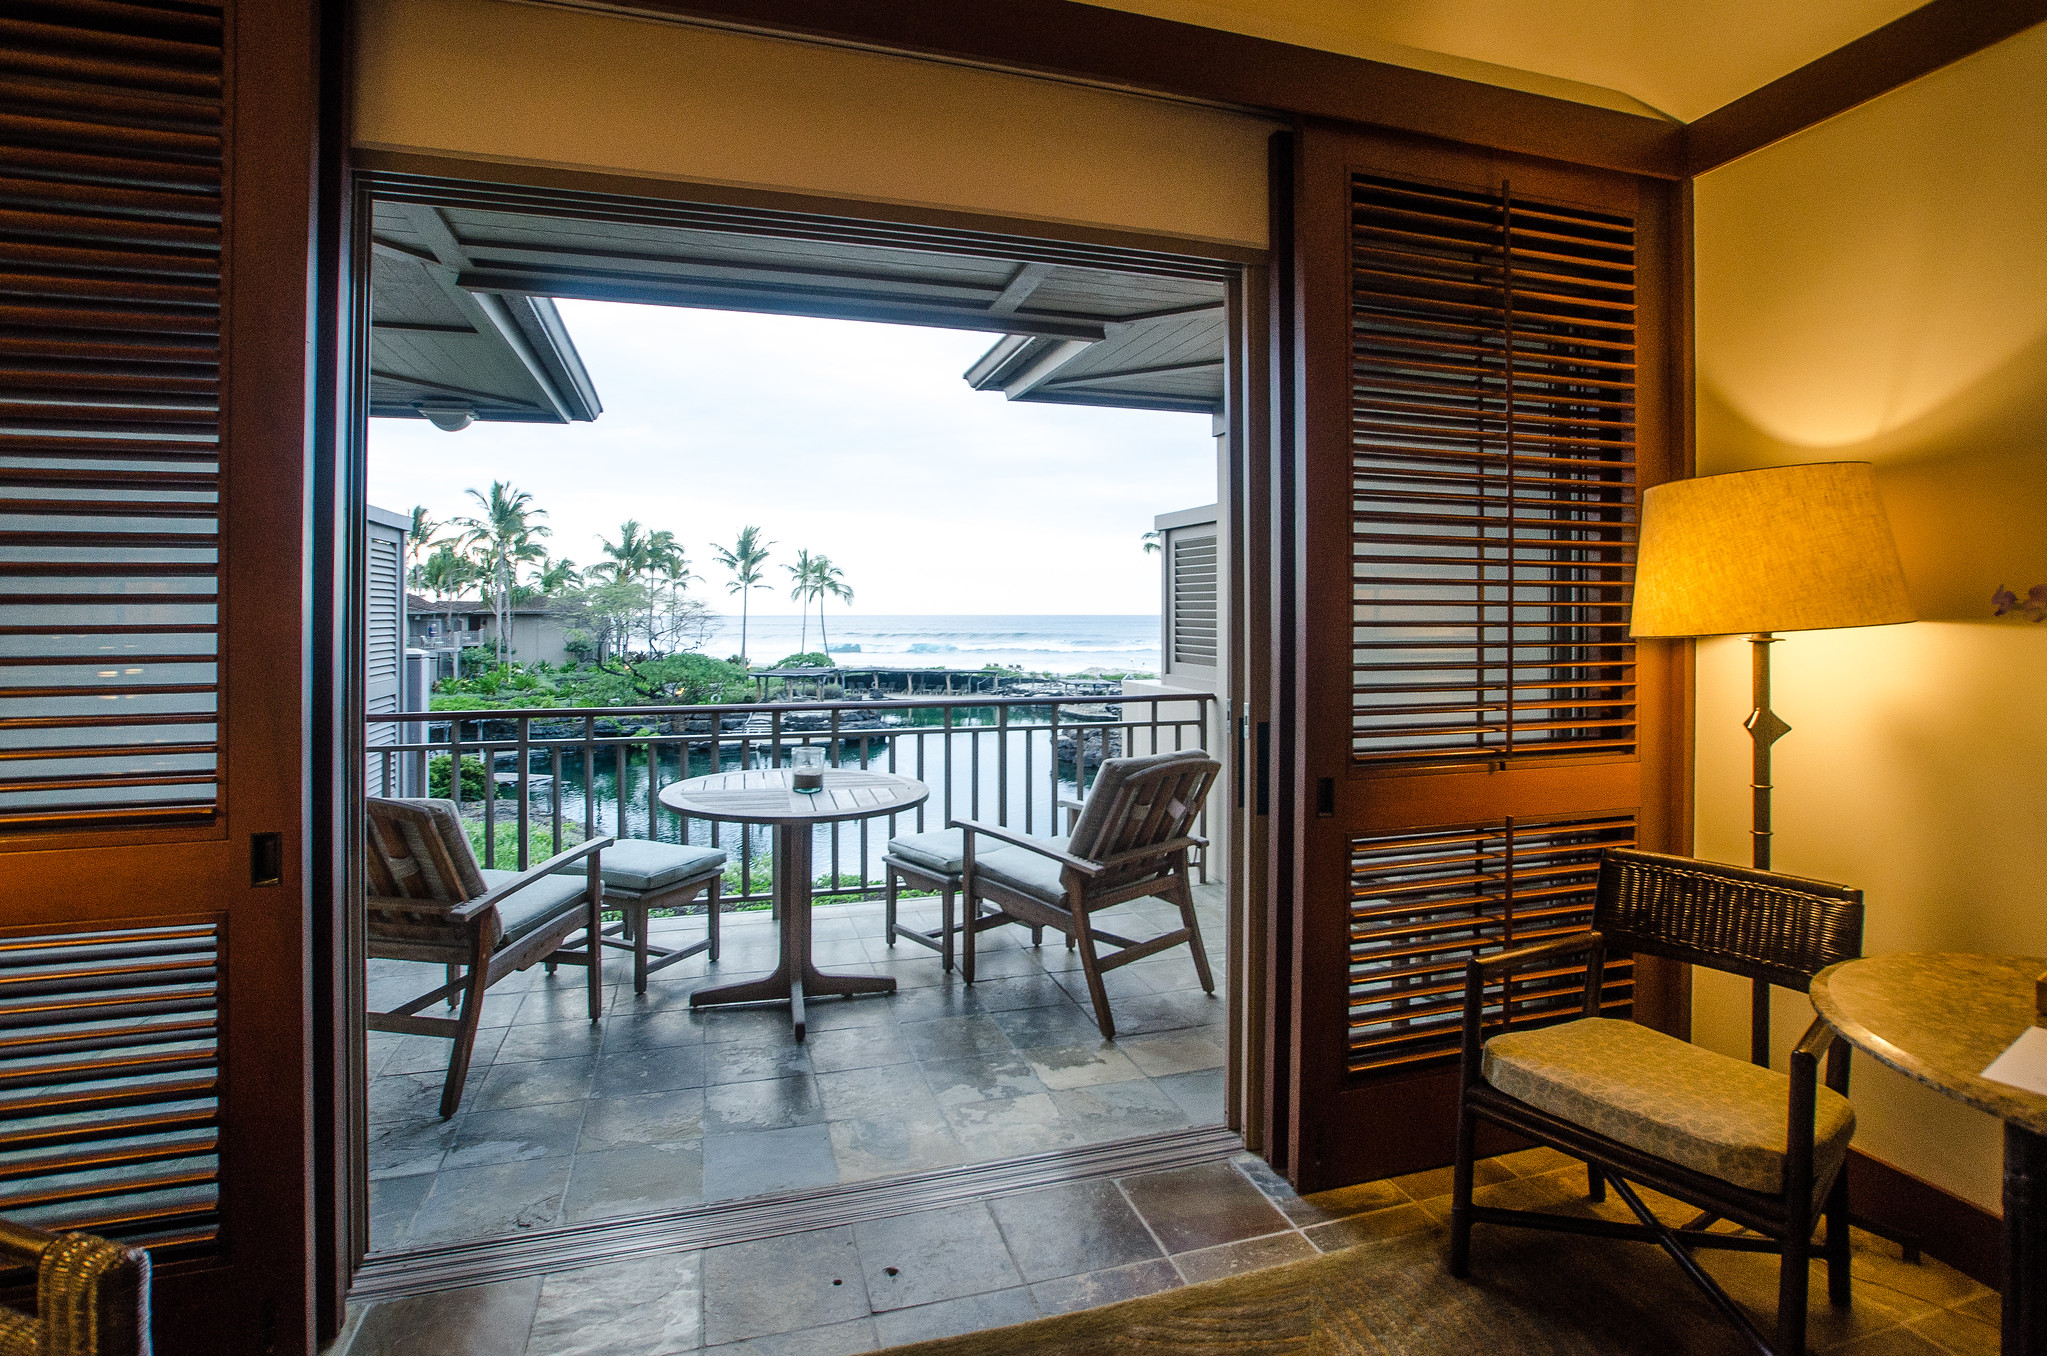 Lovely open view of the coast at an elegant room with empty chairs and a small rounded table in Four Seasons Resort Hotel in Hualalai, one of the best hotels in Kona, Hawaii